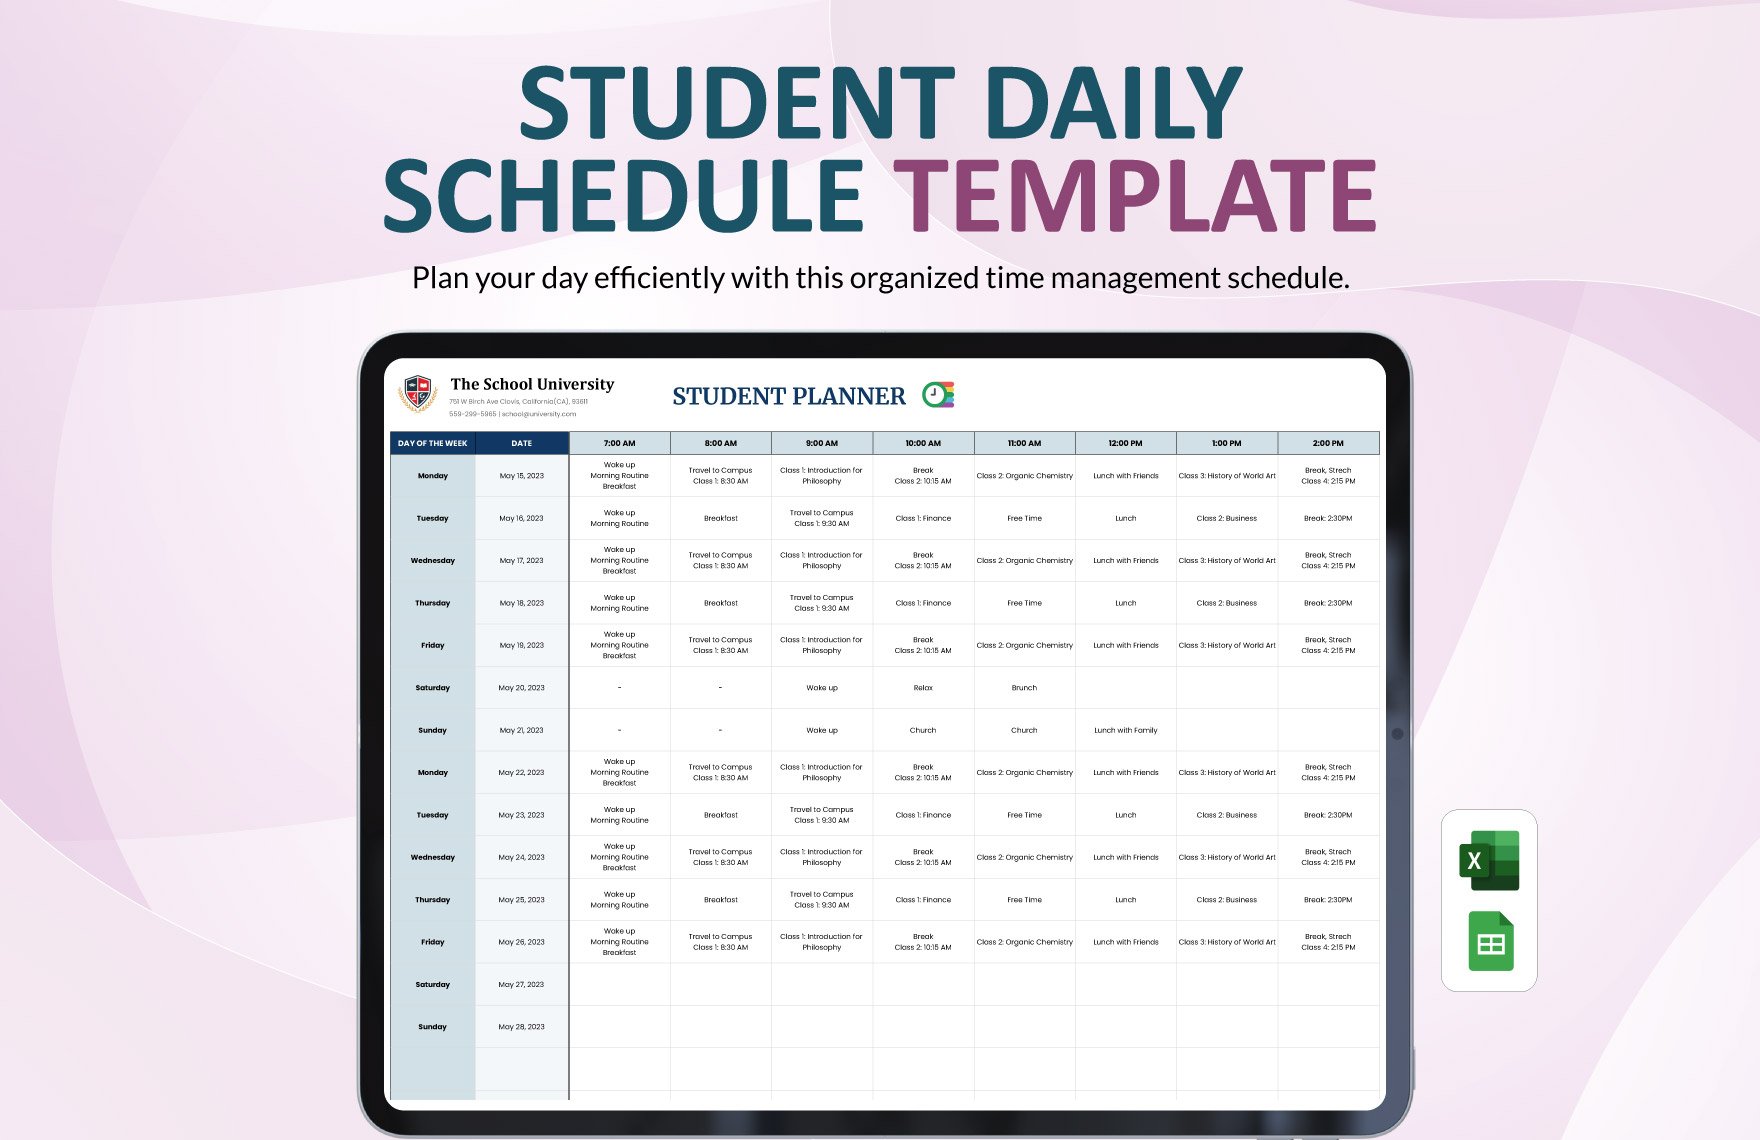 Student Daily Schedule Template in Excel, Google Sheets